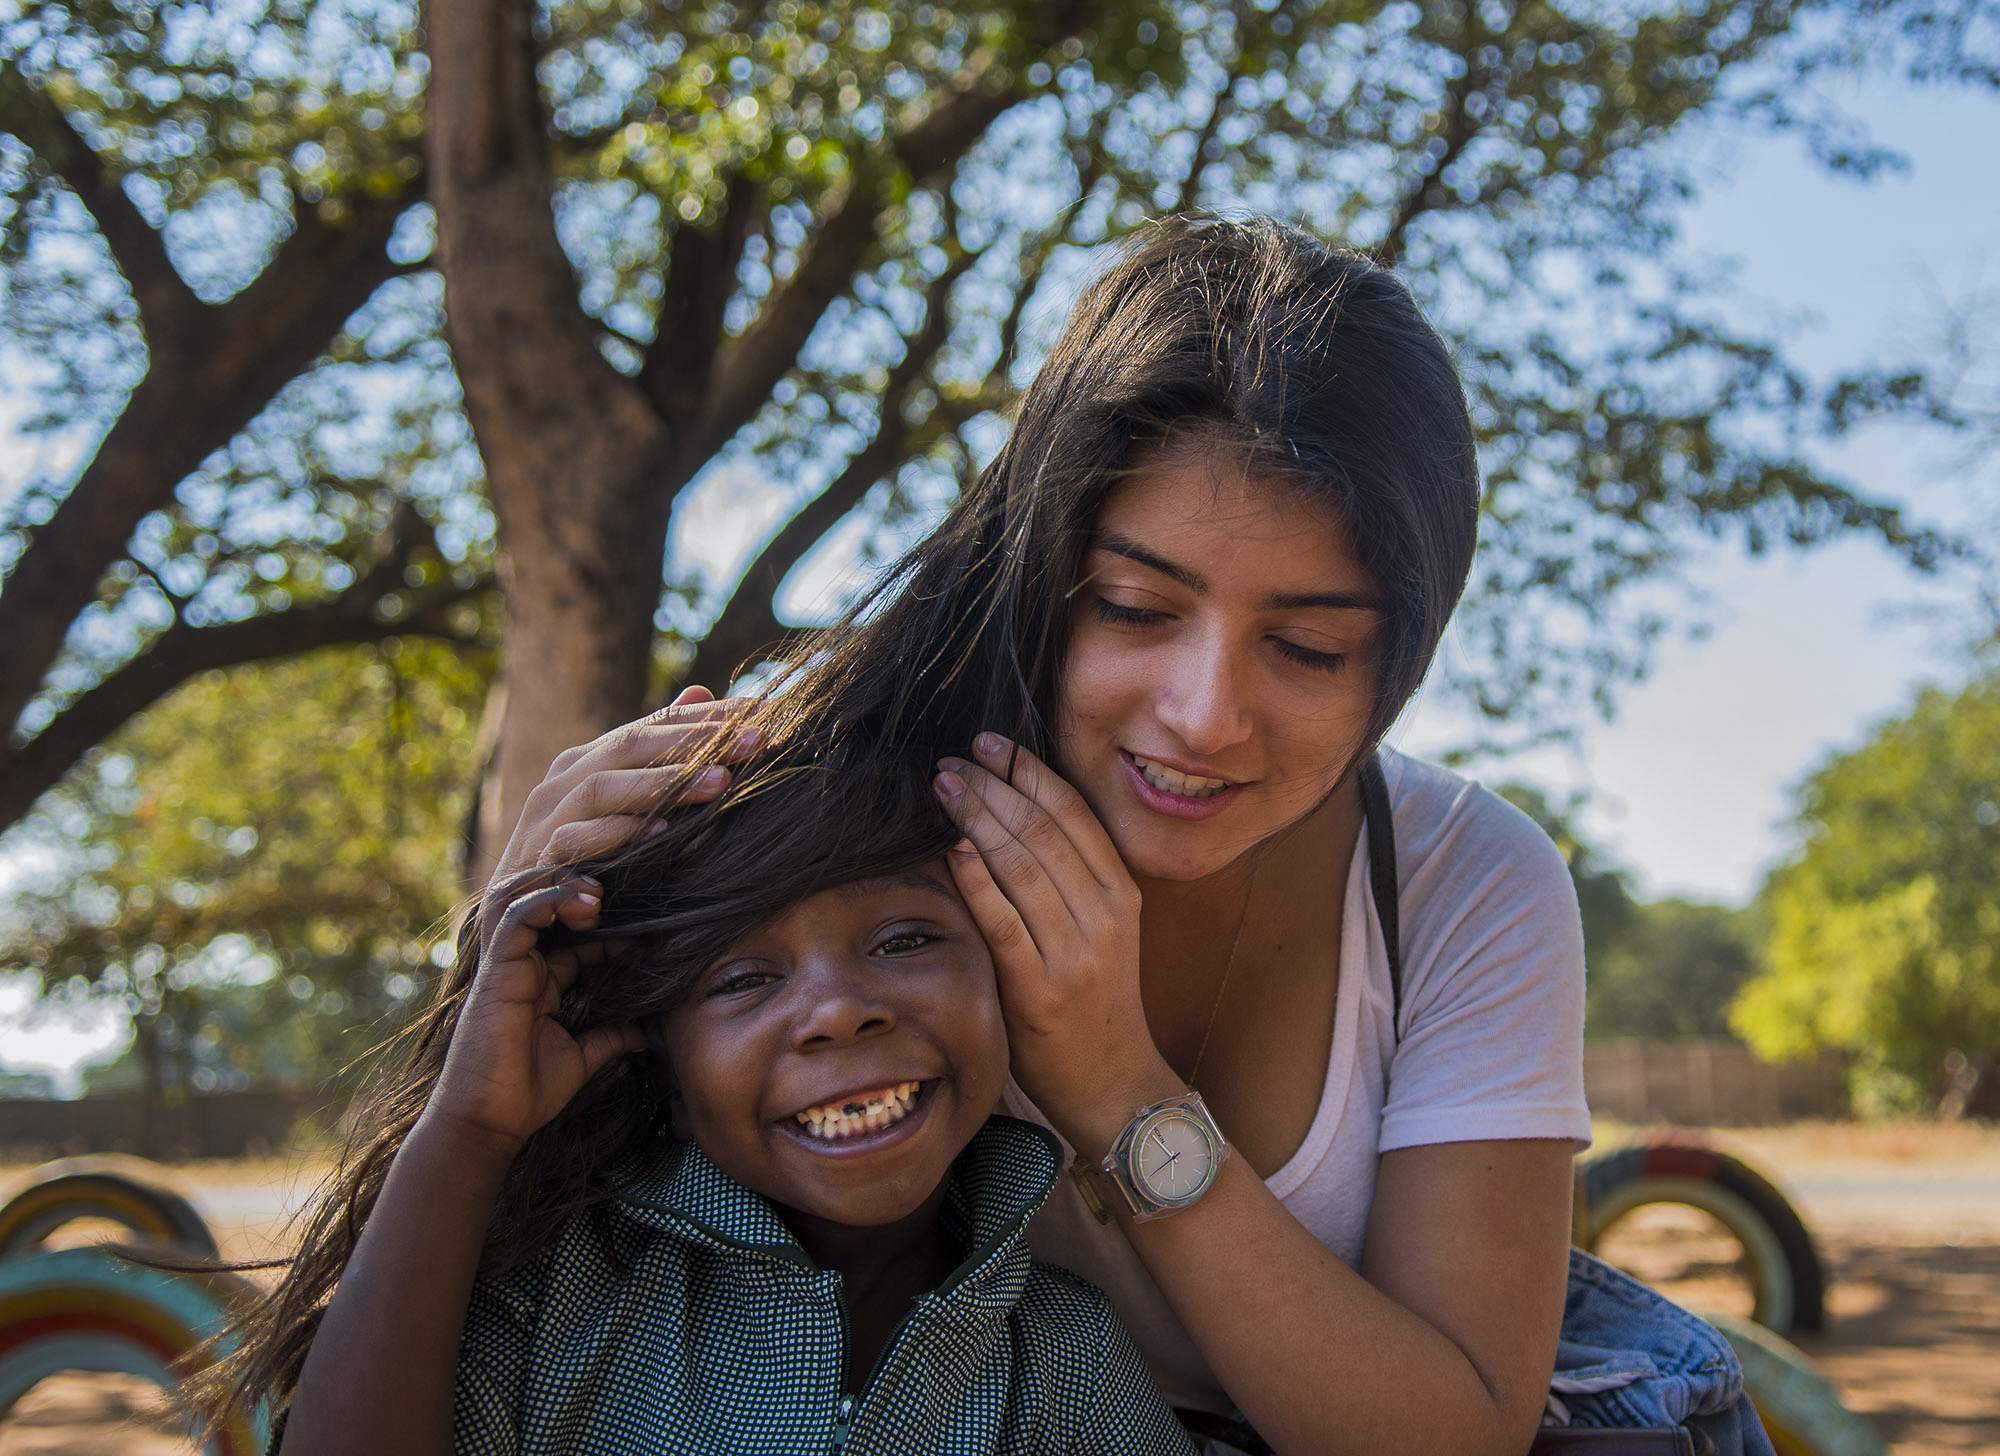  Elli Suarez is a volunteer for African Impact who has traveled all the way from Hawaii to Victoria Falls, Zimbabwe to be a part of their community project team that helps at the local old folks home, orphanage and schools. 